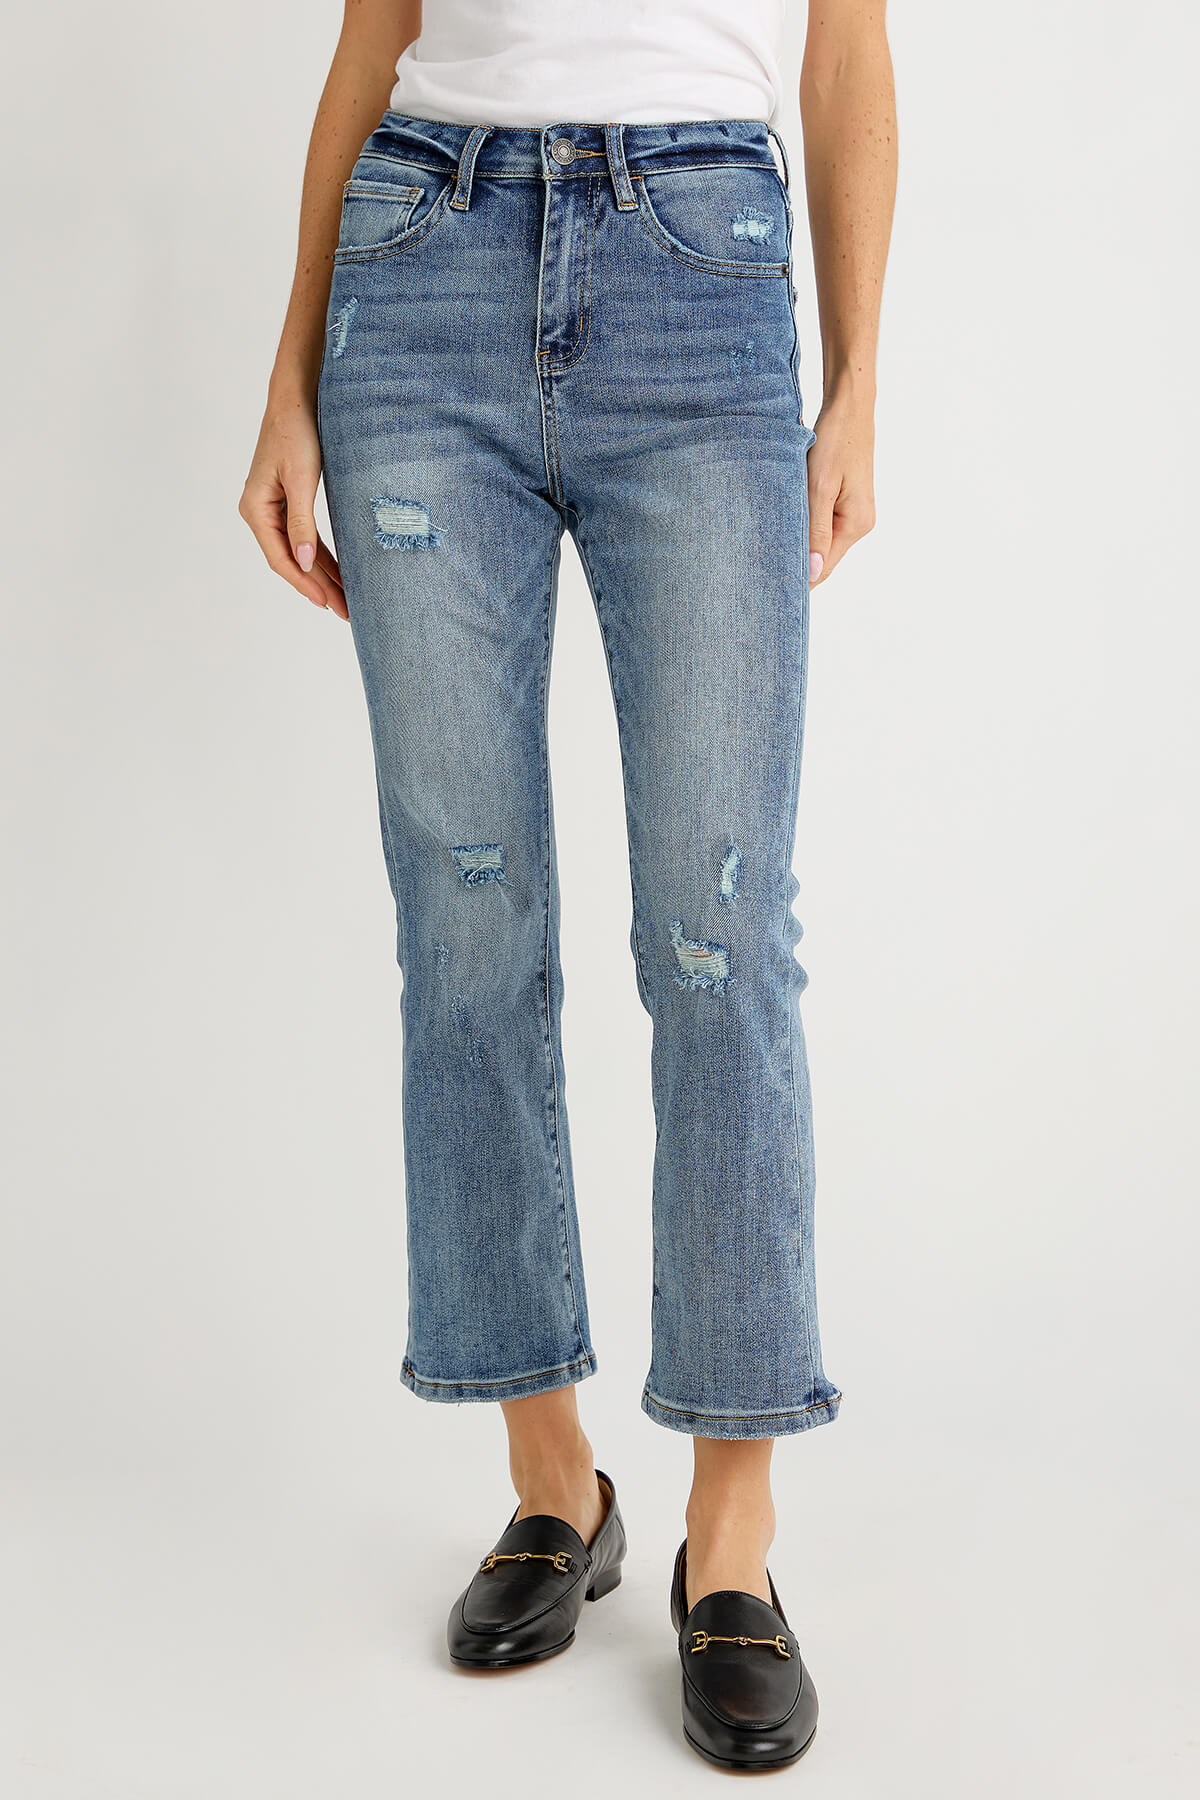 Universal Thread Women's High-Rise Vintage Straight Cropped Jeans